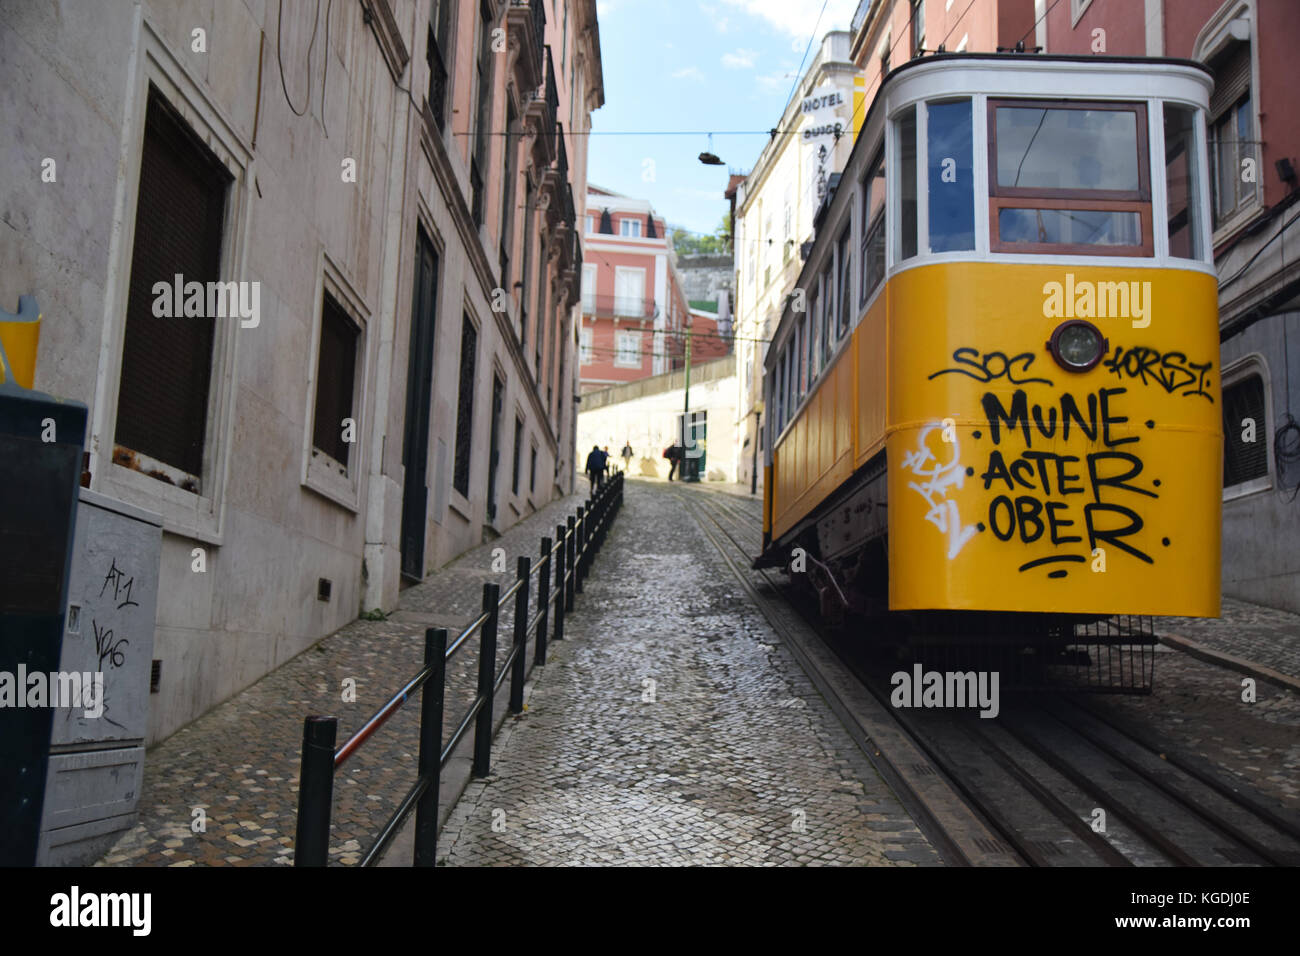 Tram going up on the streets in Lisbon Stock Photo